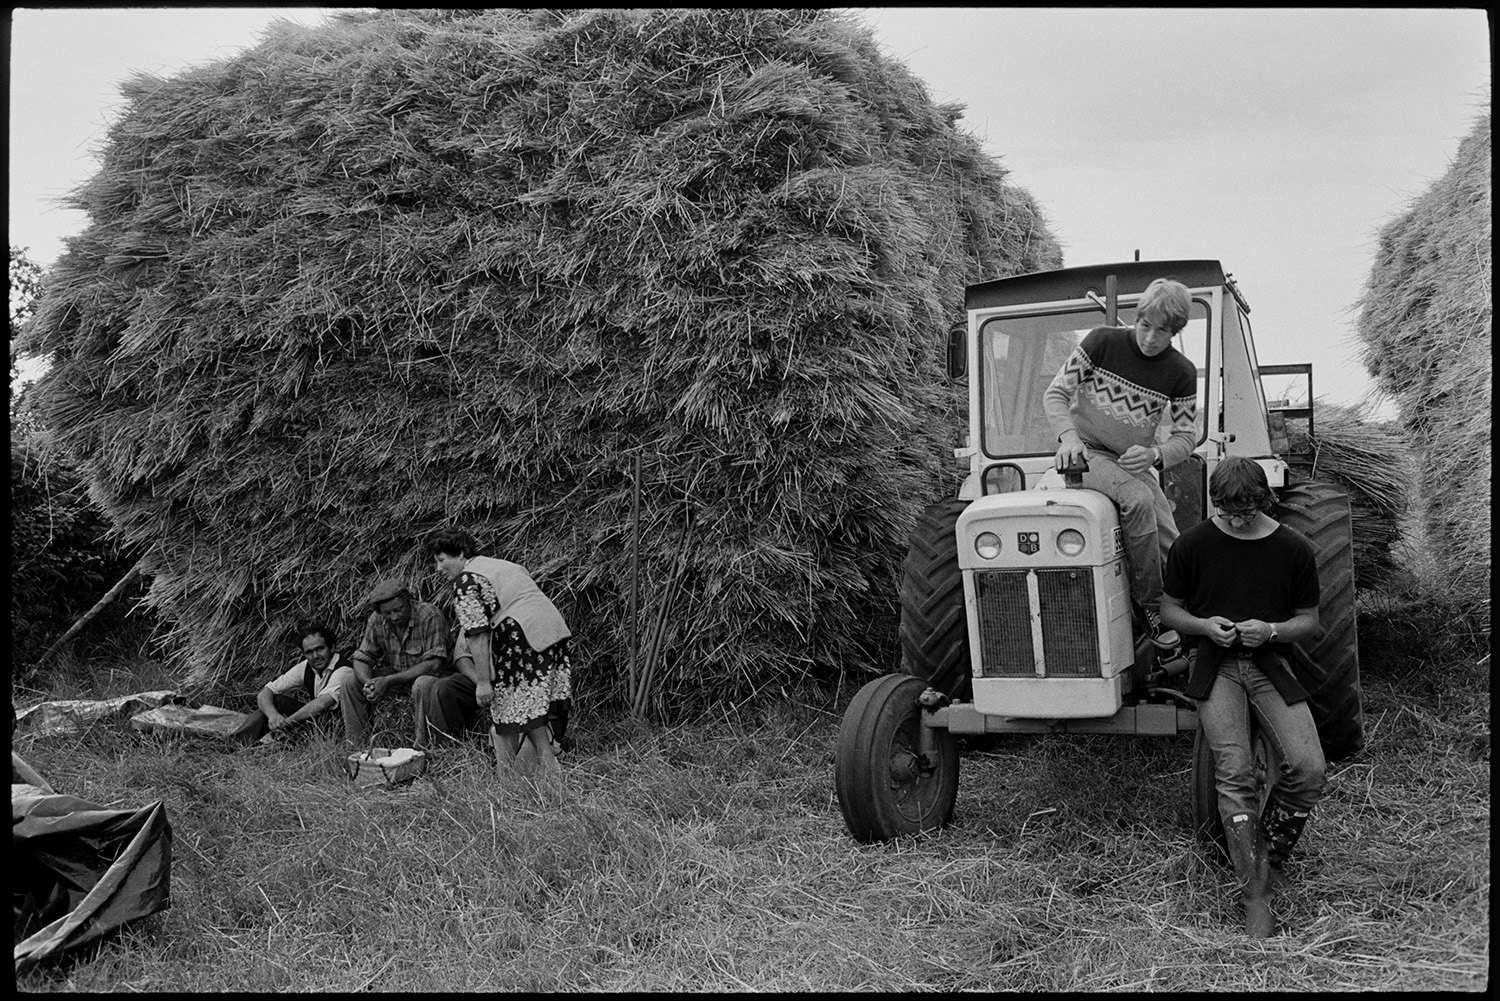 Men building wheat rick, having tea break, farmers wife with basket.
[Men building a wheat rick at Riddlecombe, having a tea break. Three men are sat under the rick and two other young men are leaning on a David Brown tractor nearby. A woman has brought them a basket of food.]